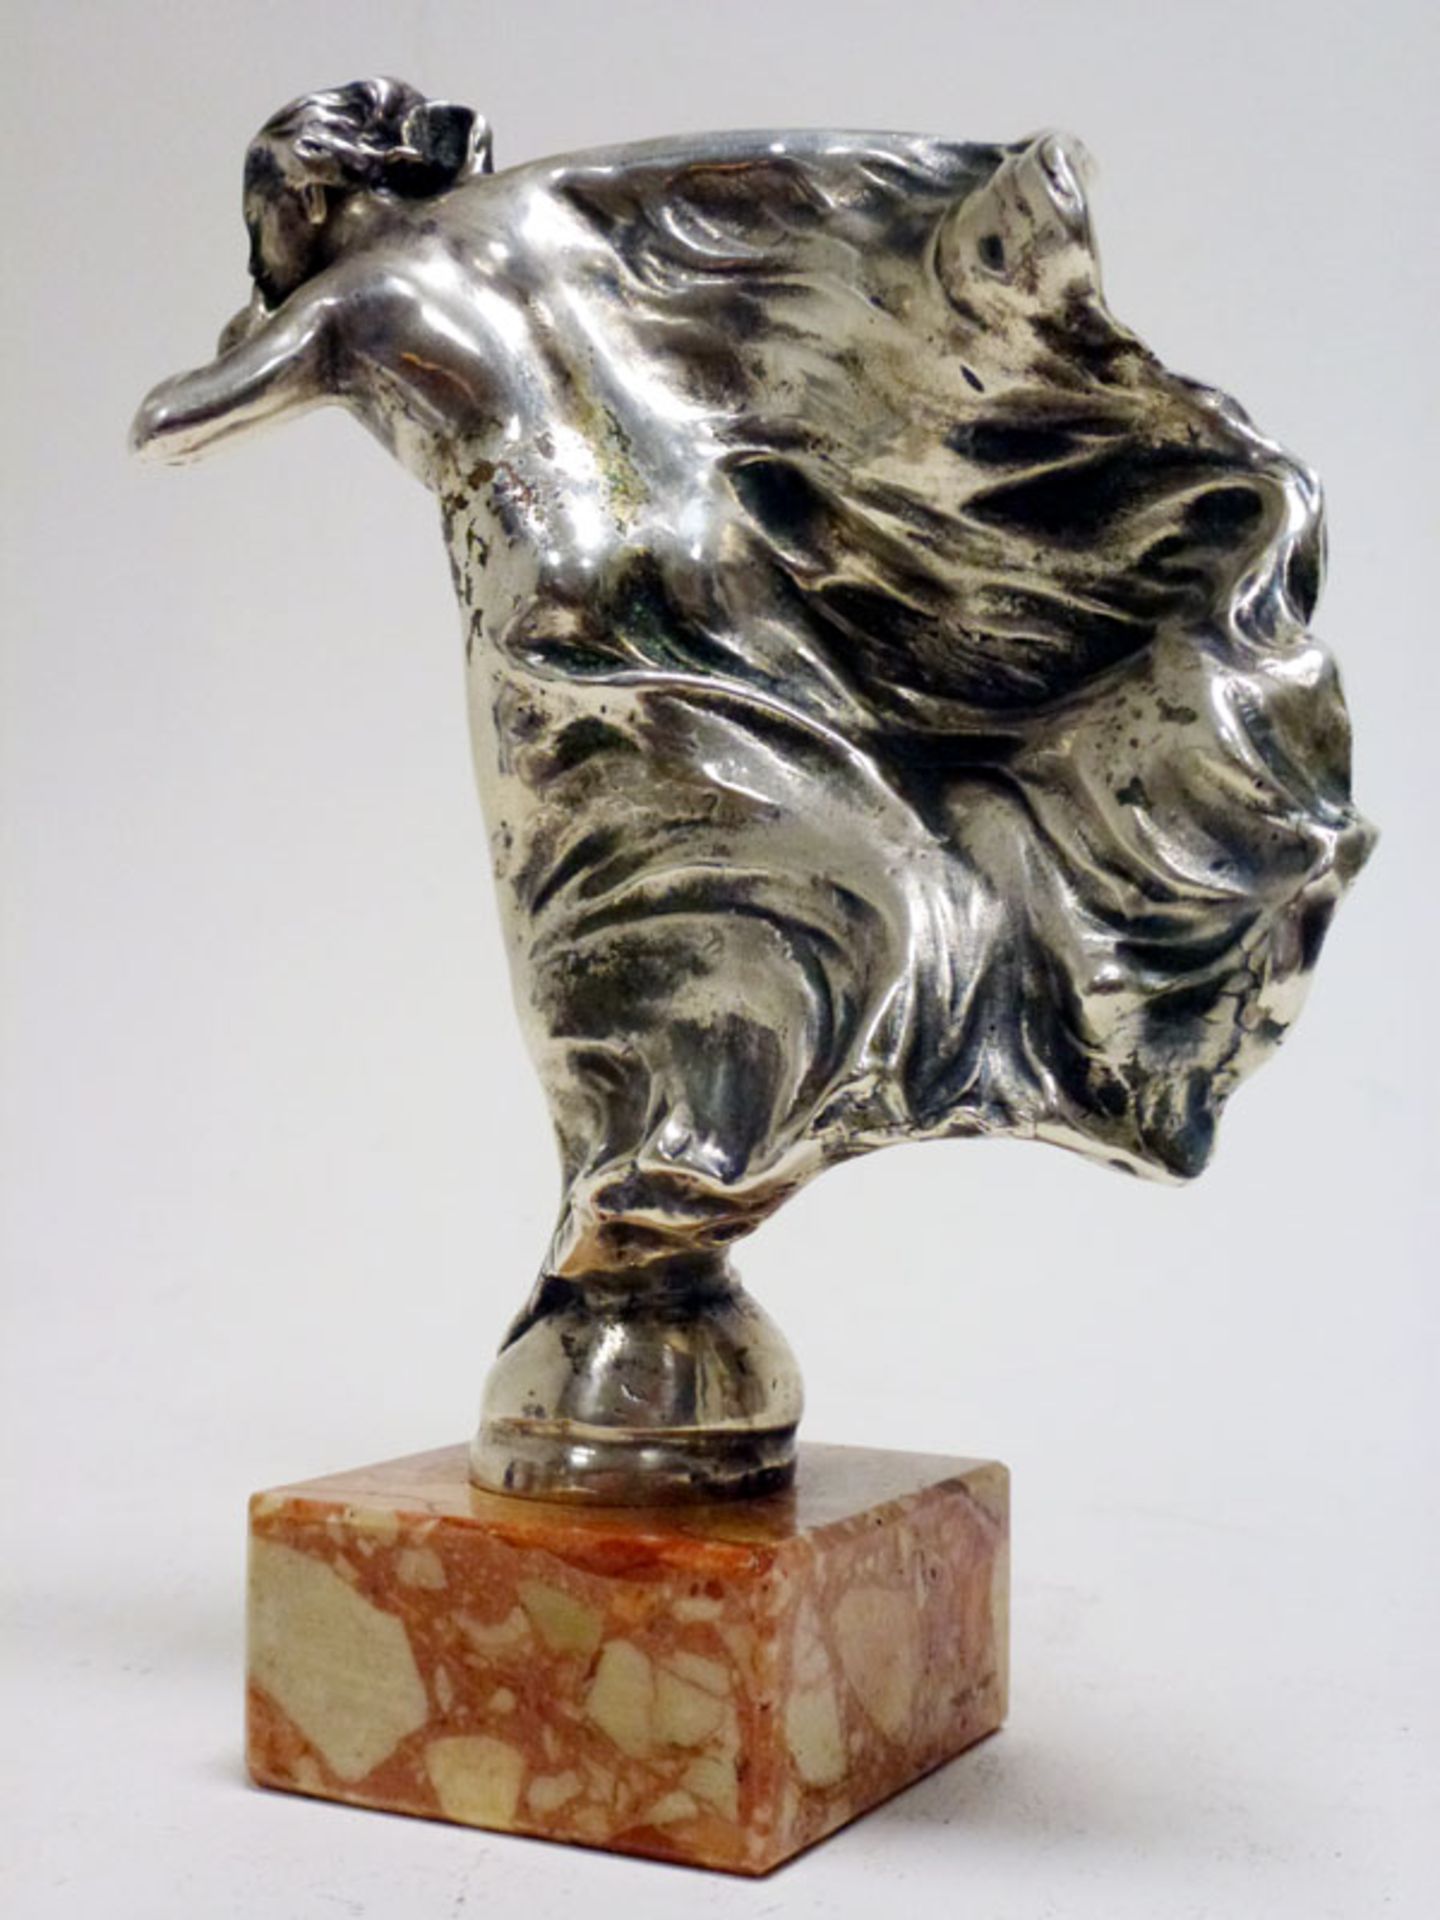 An Excellent 'Whisper' Mascot for Rolls-Royce Ltd, Signed C. Sykes - Image 2 of 4